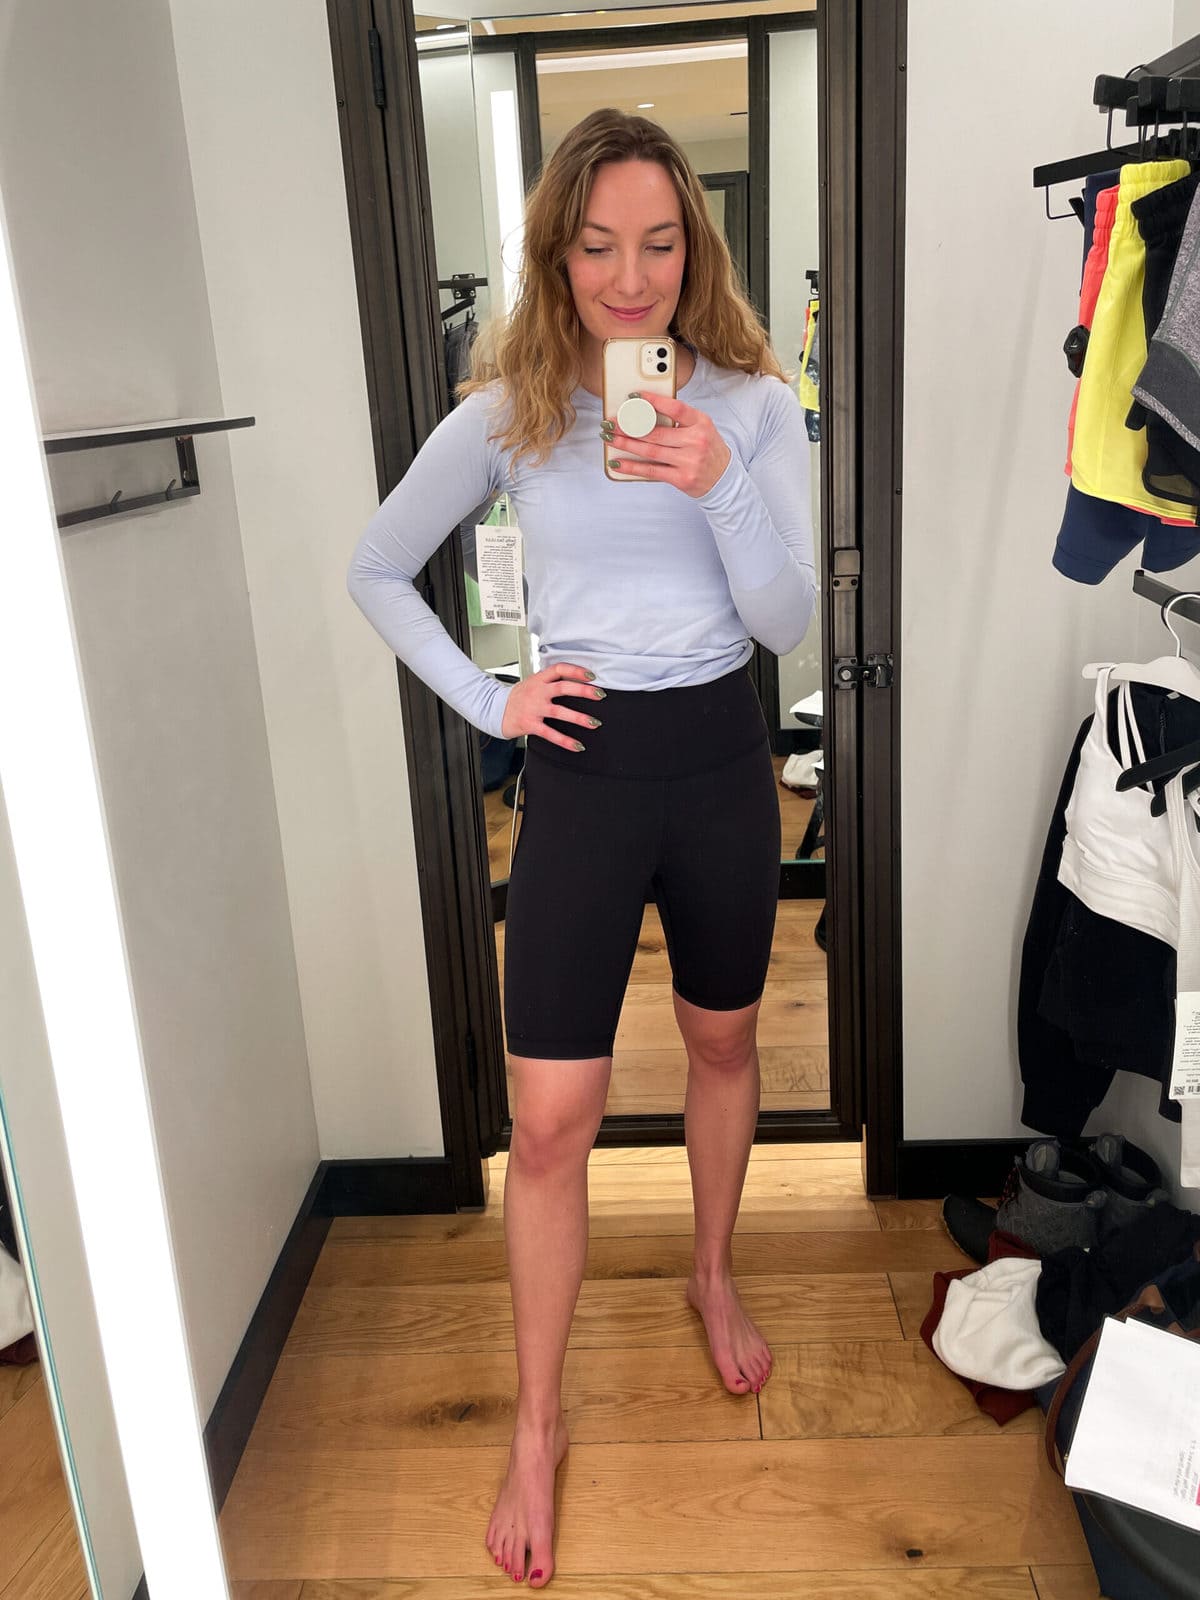 Align Shorts Inches Vs Inches On 5'2” R/lululemon, 58% OFF